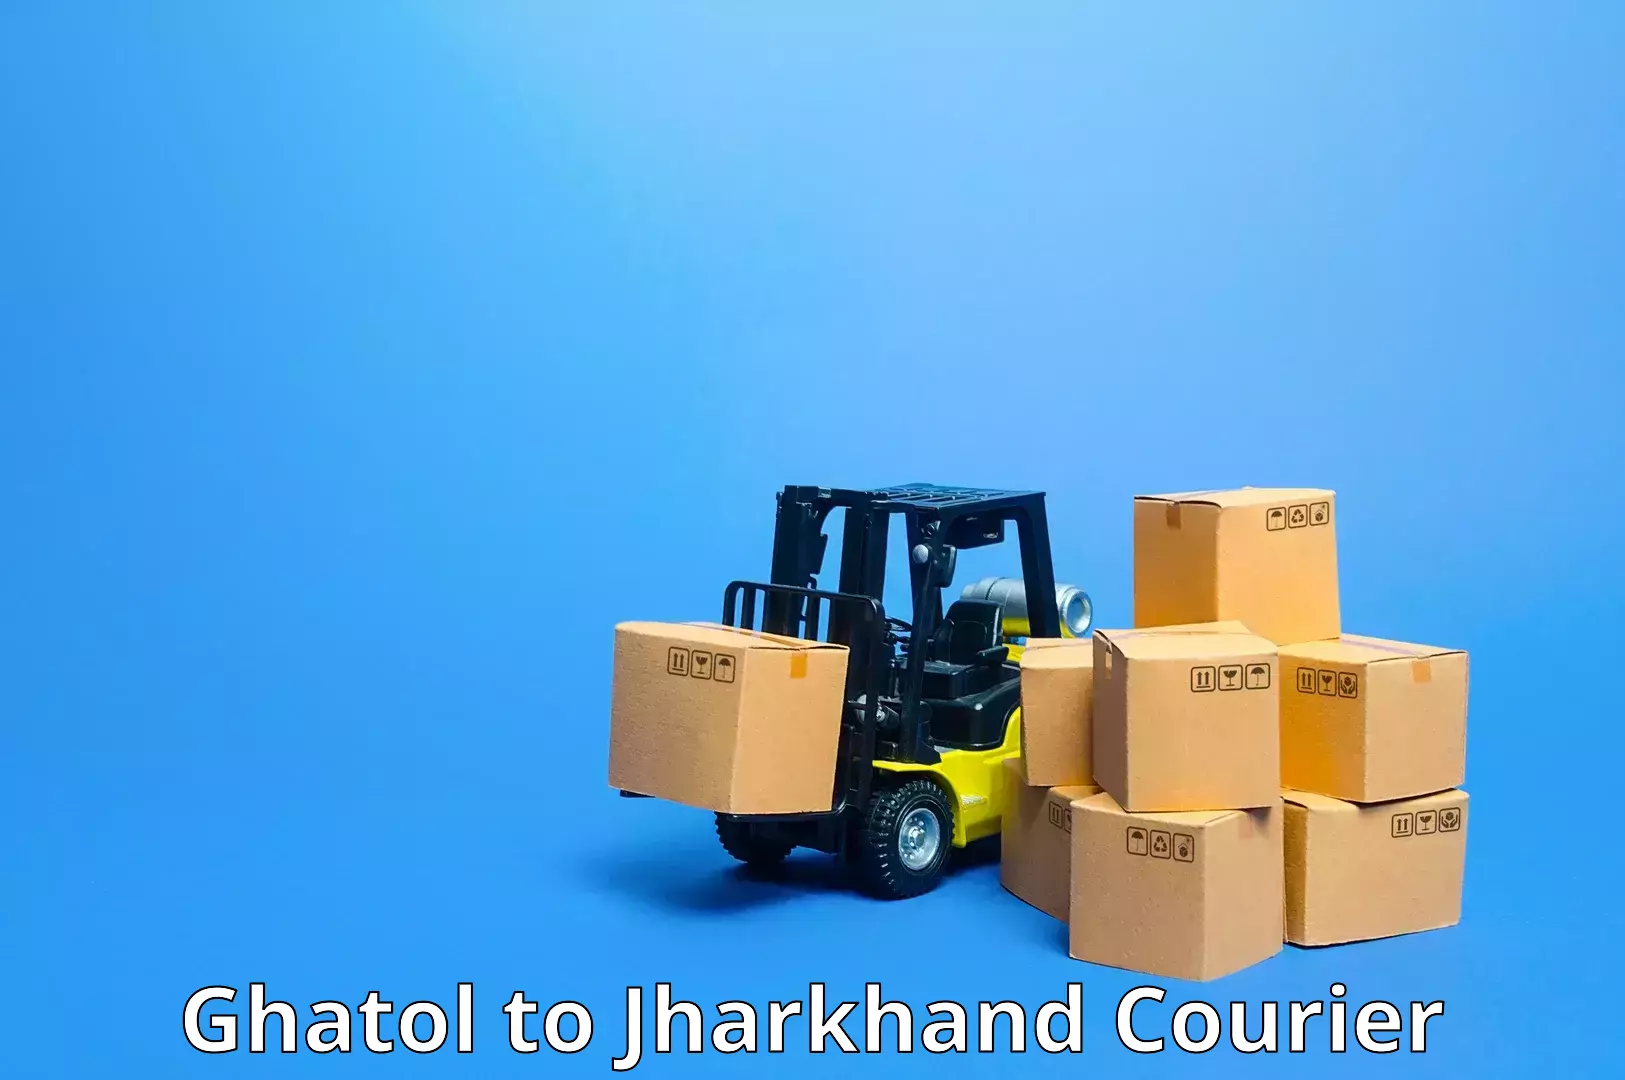 Express delivery capabilities Ghatol to Jharkhand